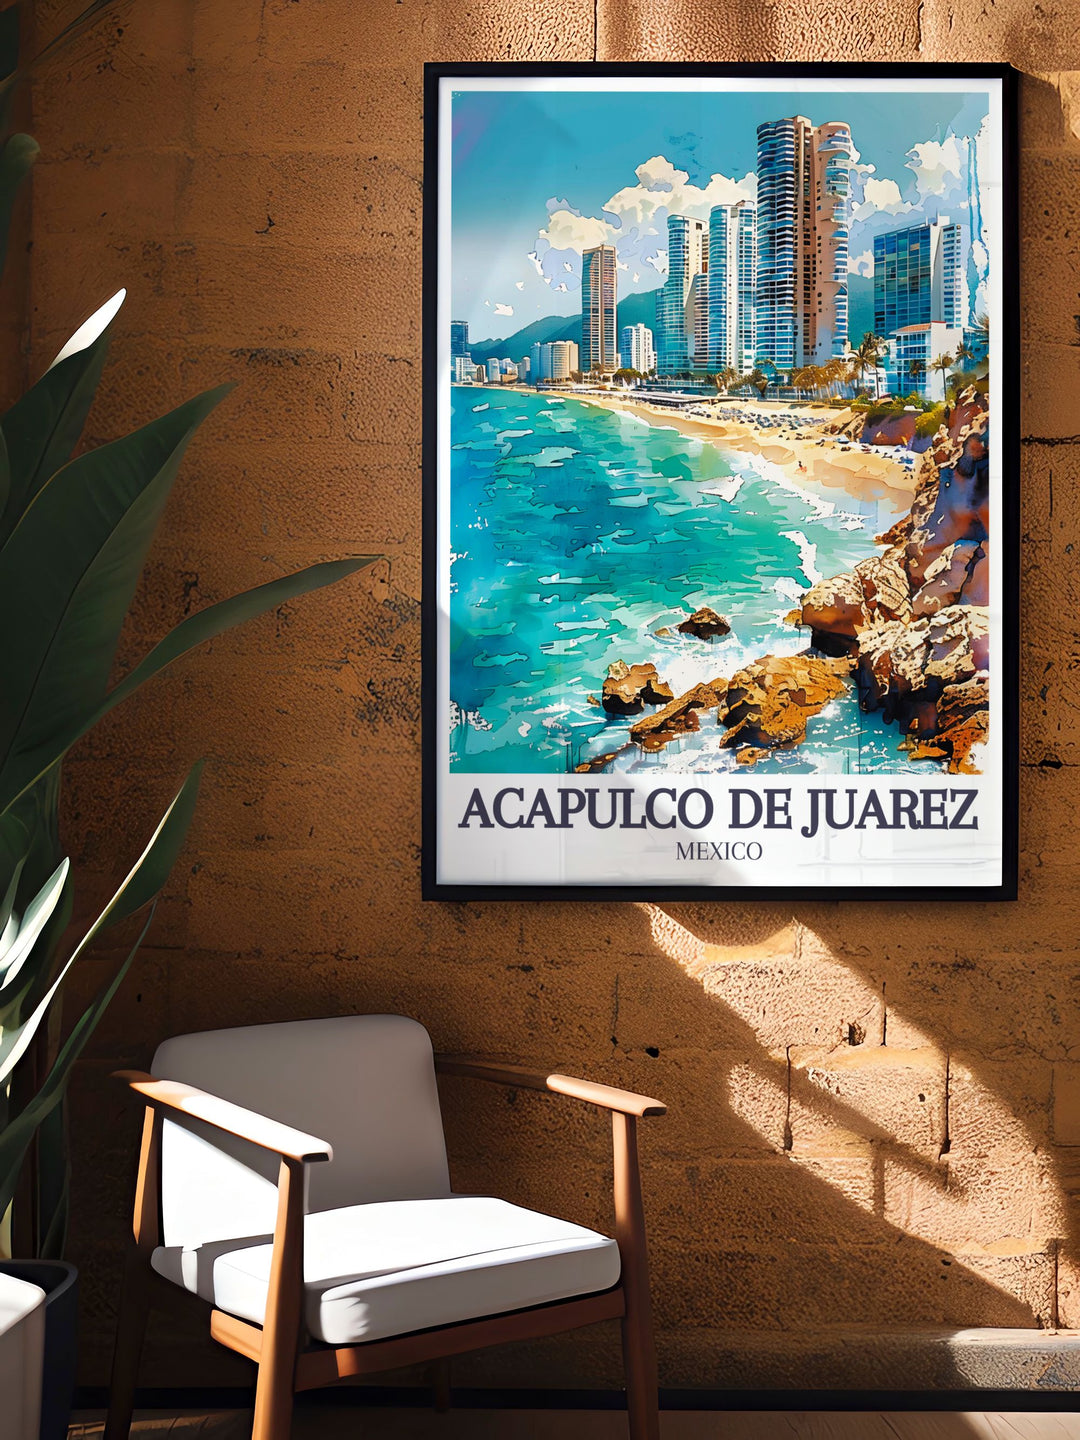 Experience the dynamic energy and natural splendor of Acapulco de Juárez with this poster, featuring Playa Condesa and the stunning Acapulco Bay.